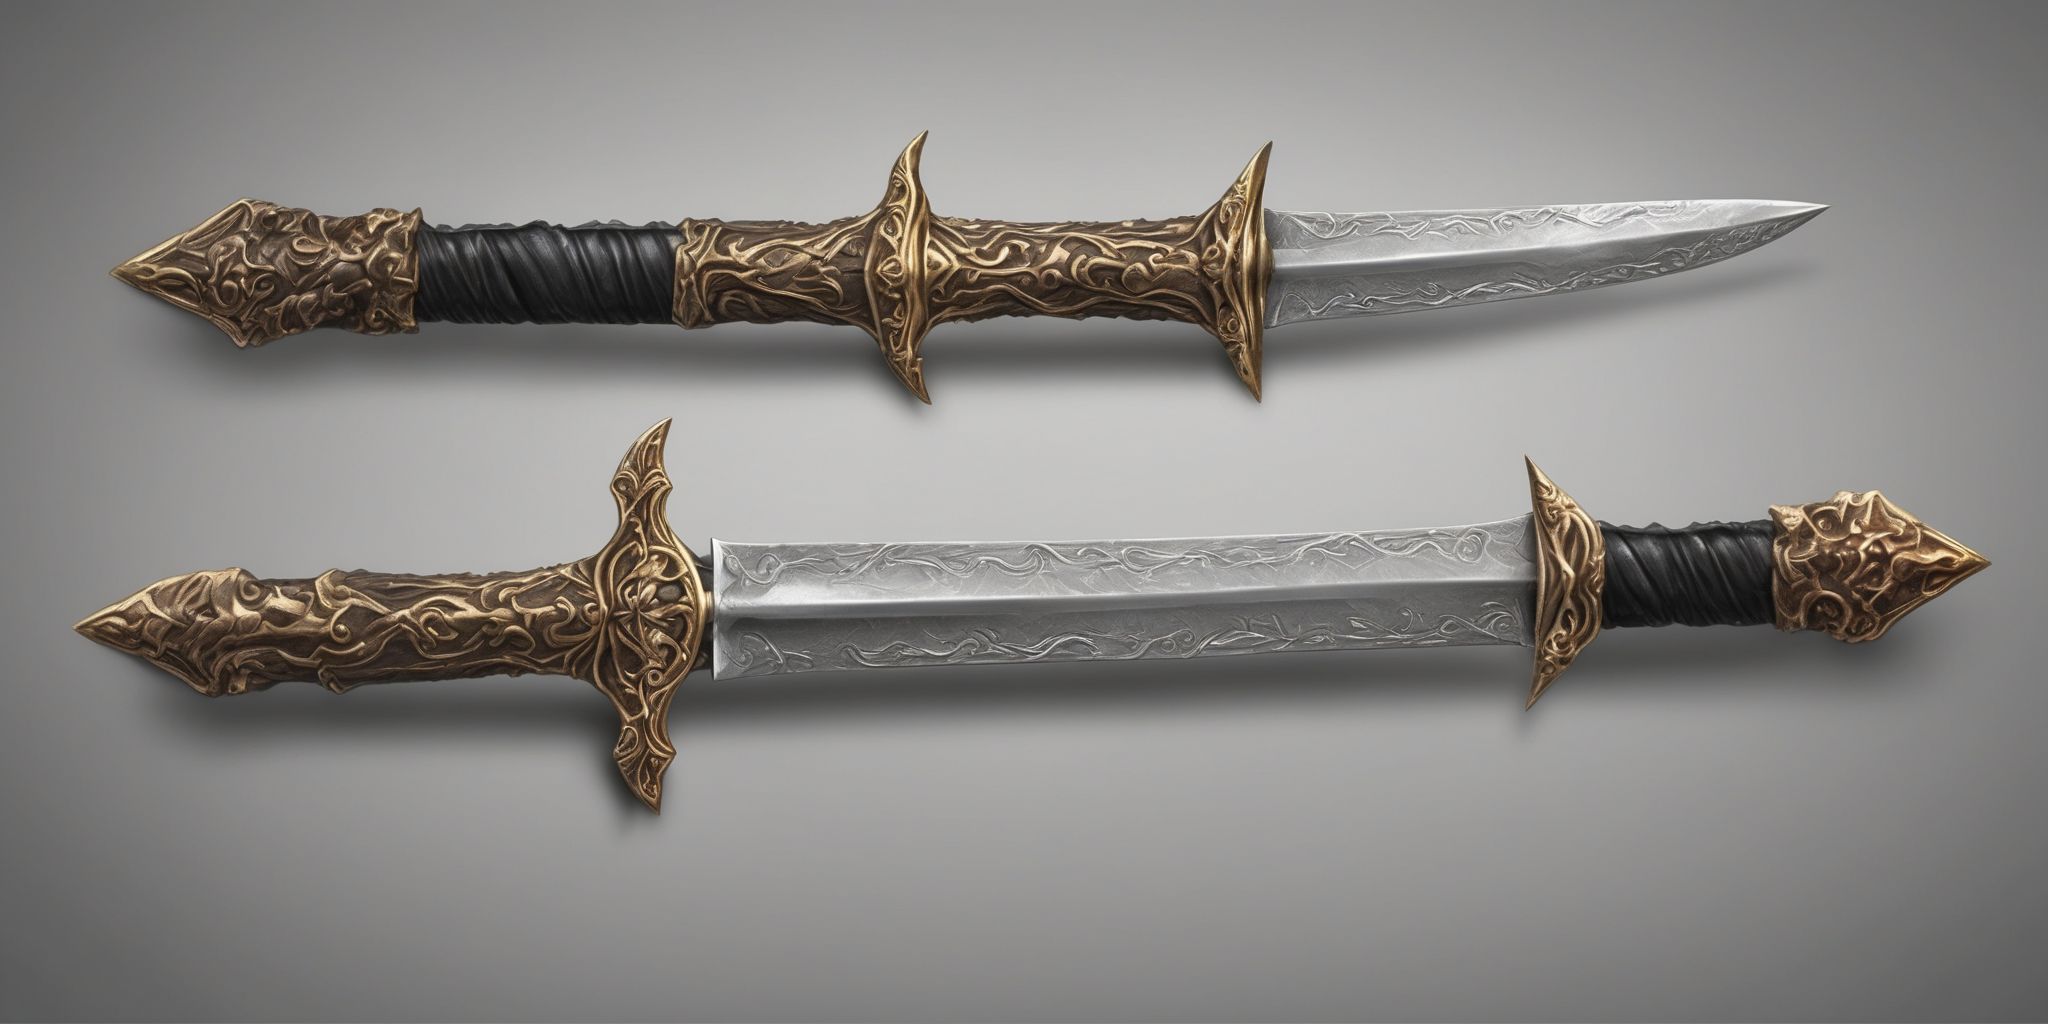 Dagger  in realistic, photographic style